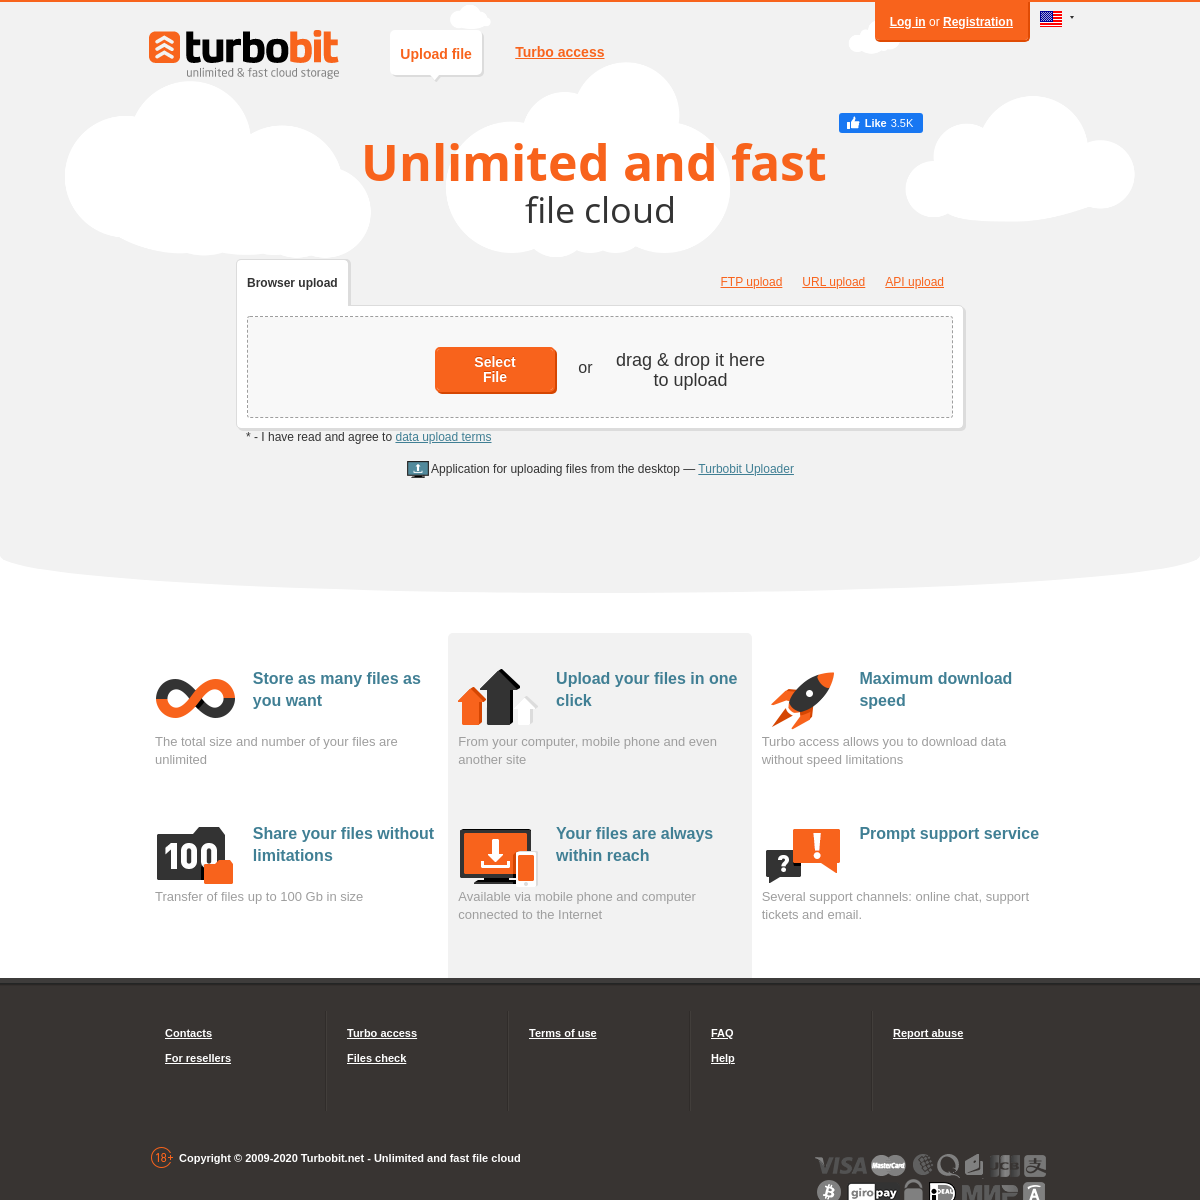 A complete backup of turbobit.net